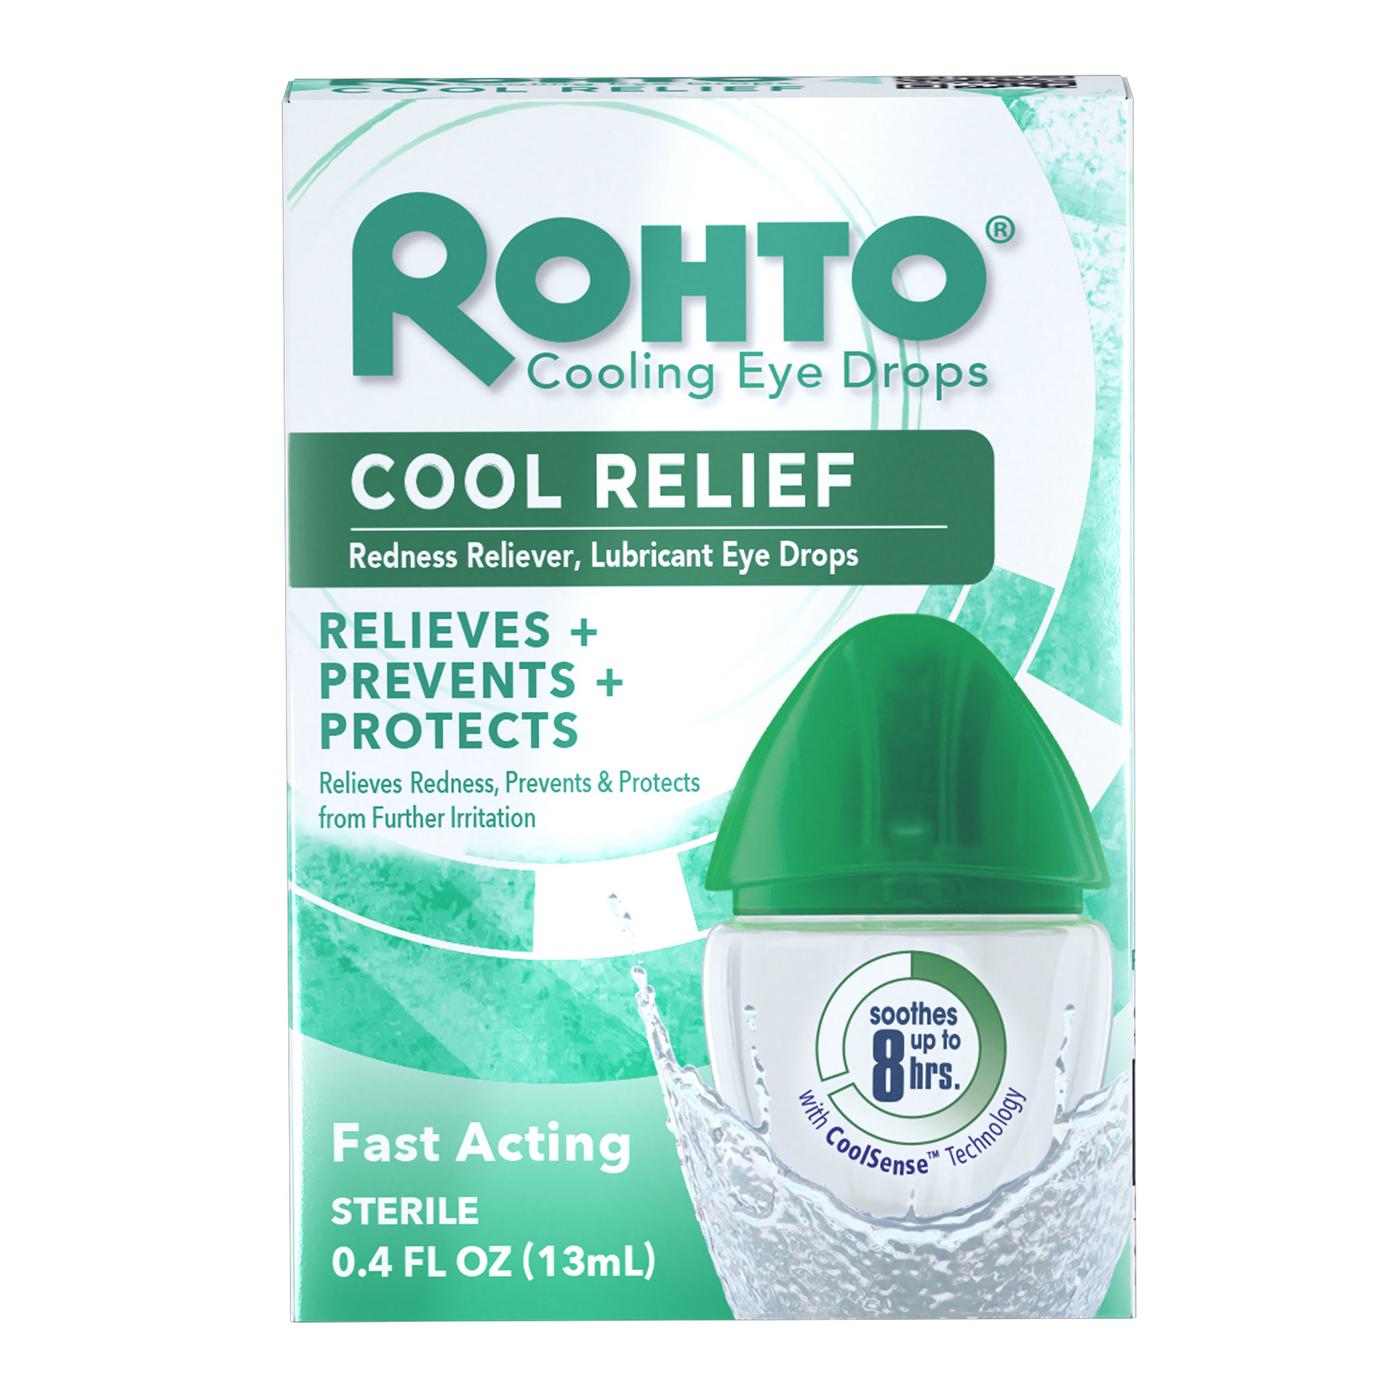 Rohto Cool Relief Lubricant Eye Drops; image 1 of 7